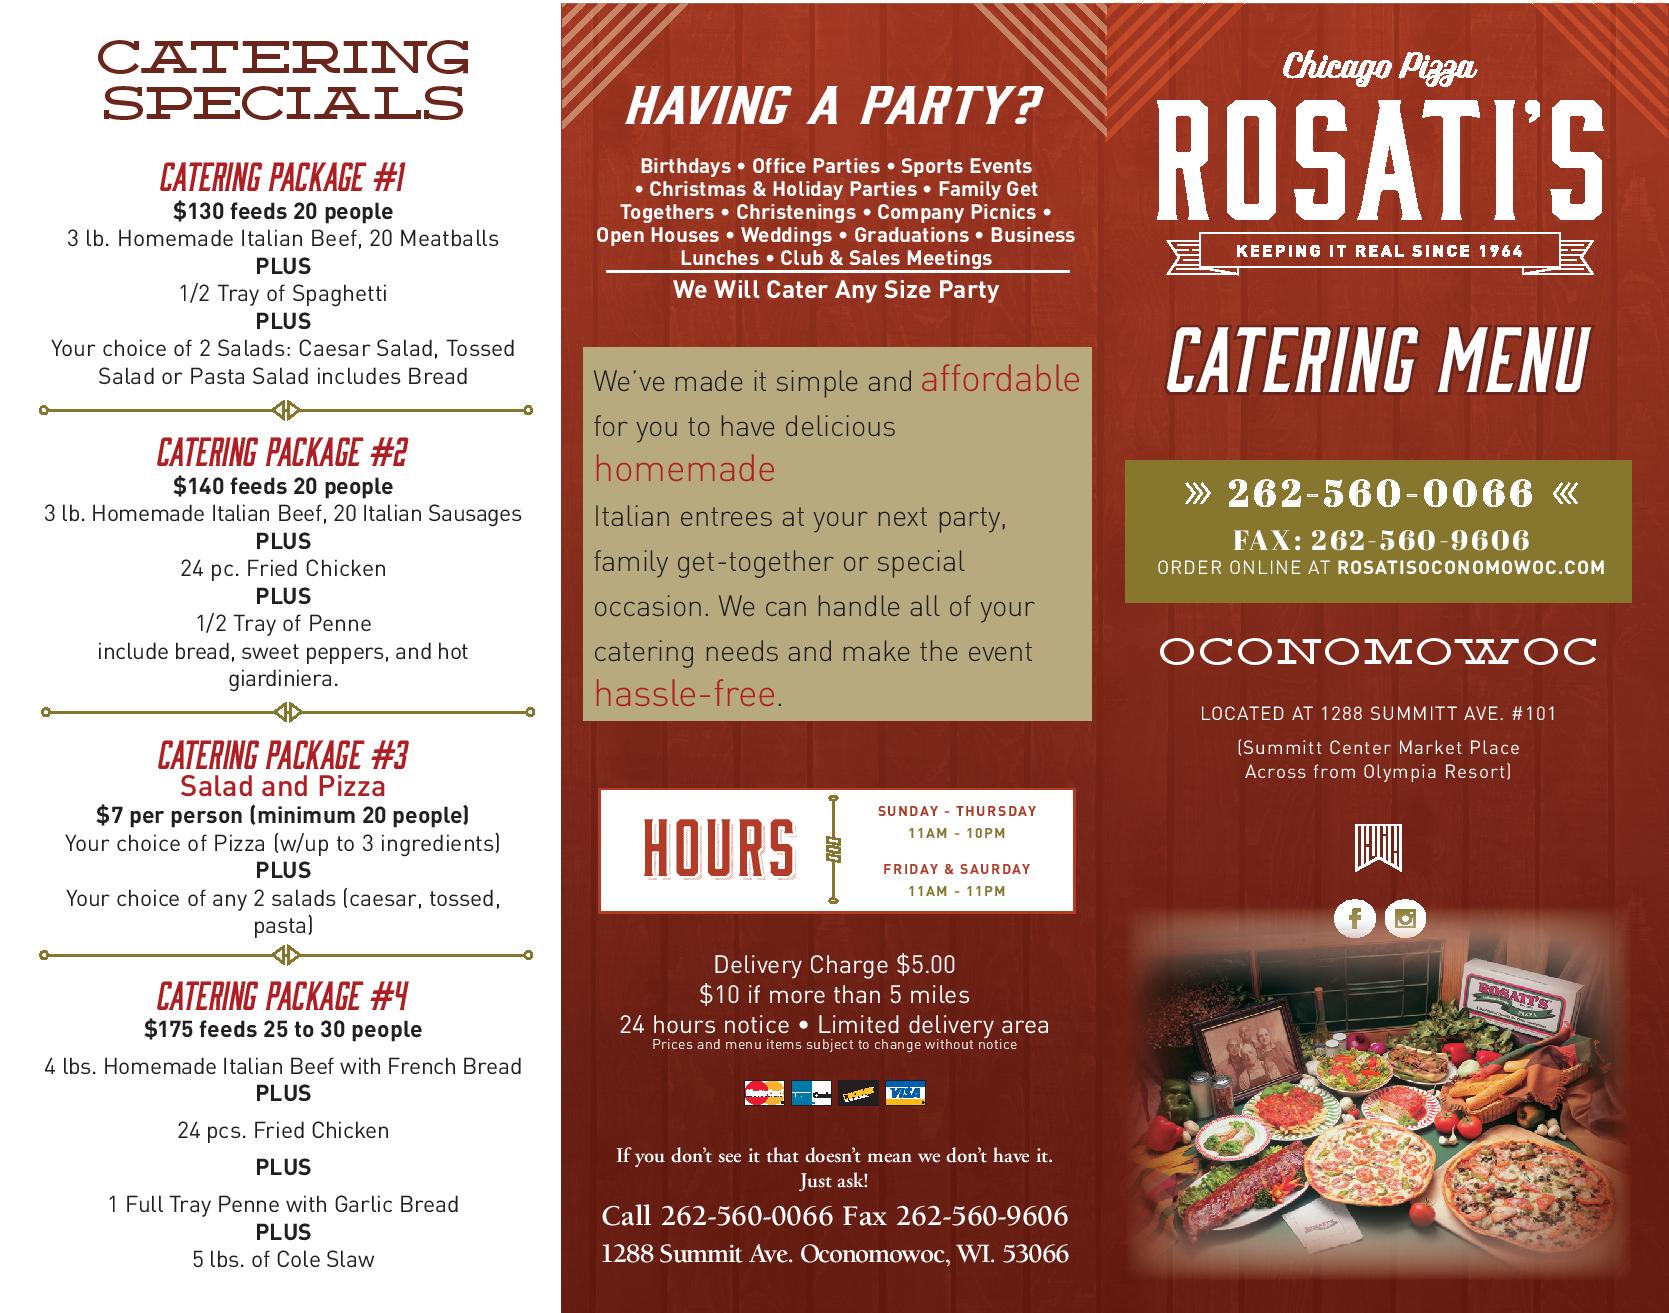 catering-chicago-style-food-oconomowoc-wi